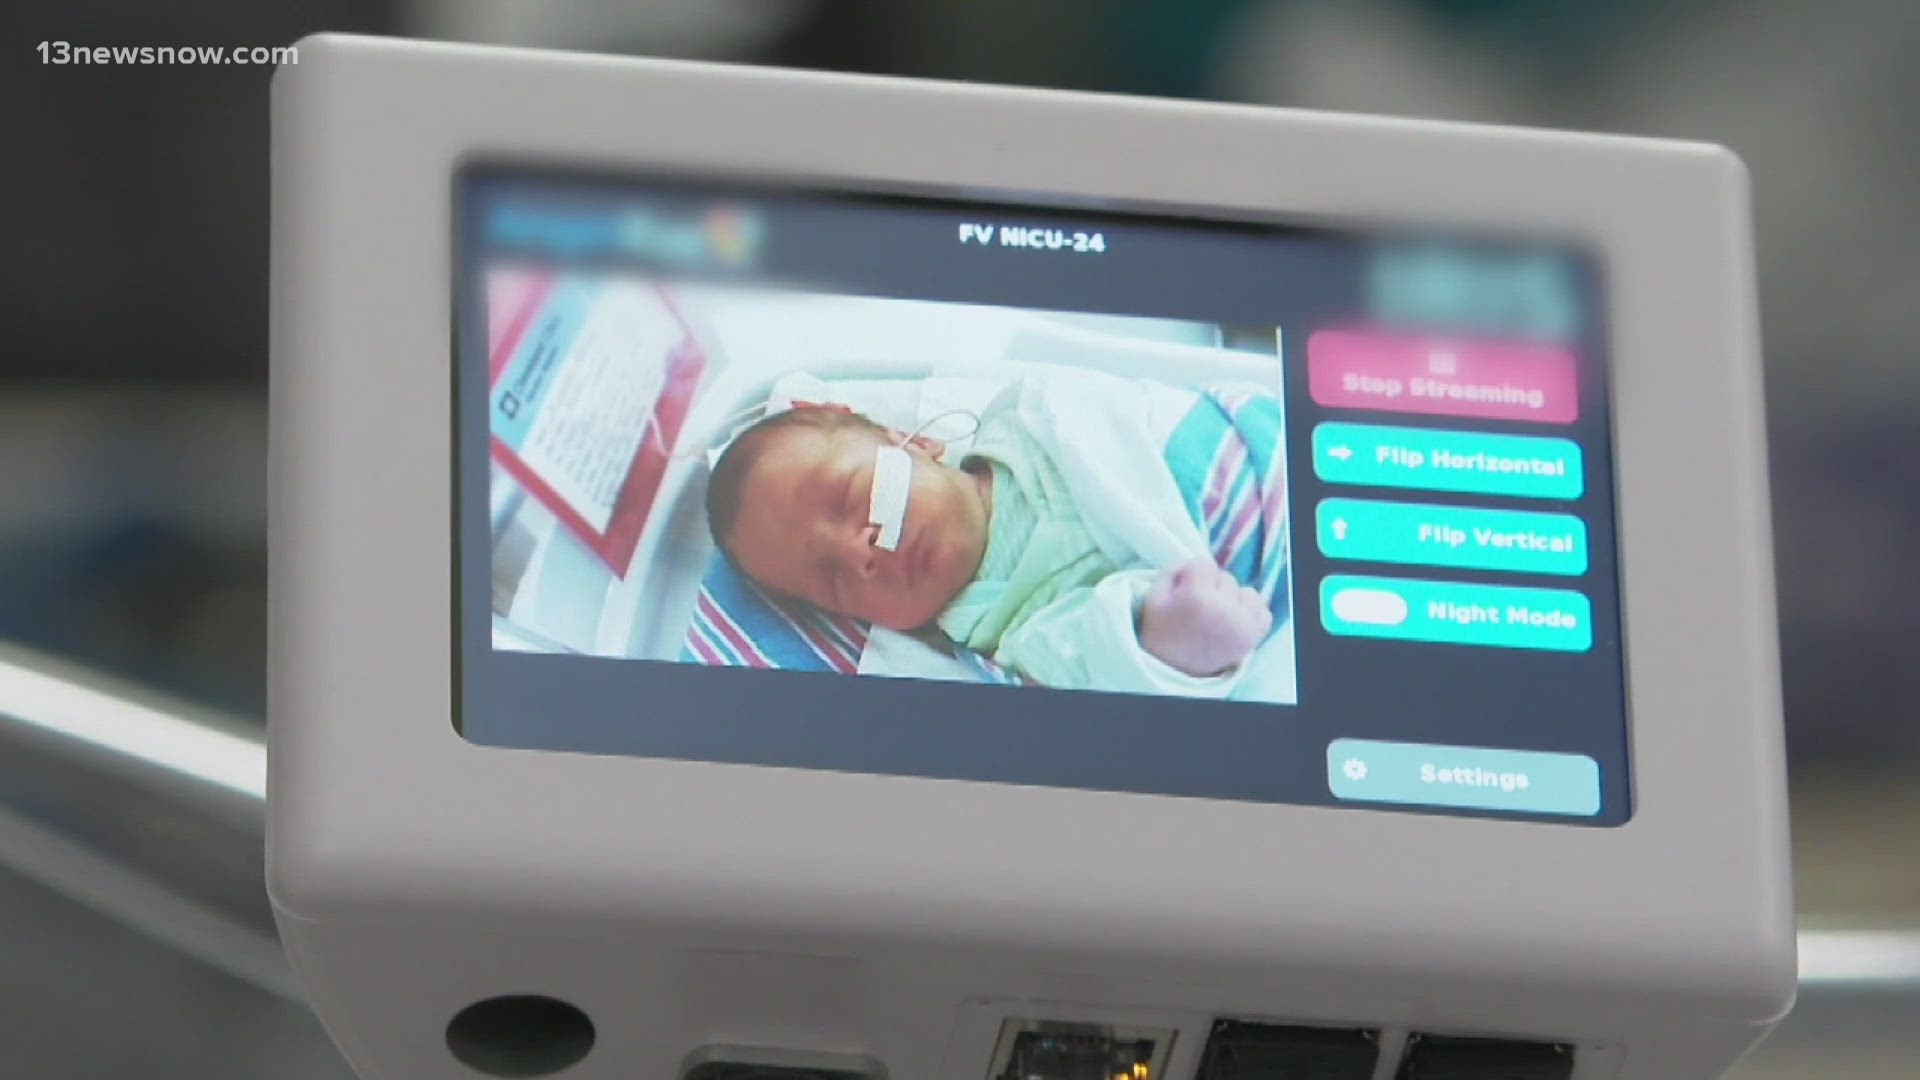 New research at the Cleveland Clinic is helping ease stress for parents with children in the NICU. They're allowing parents to bond with their babies using webcams.